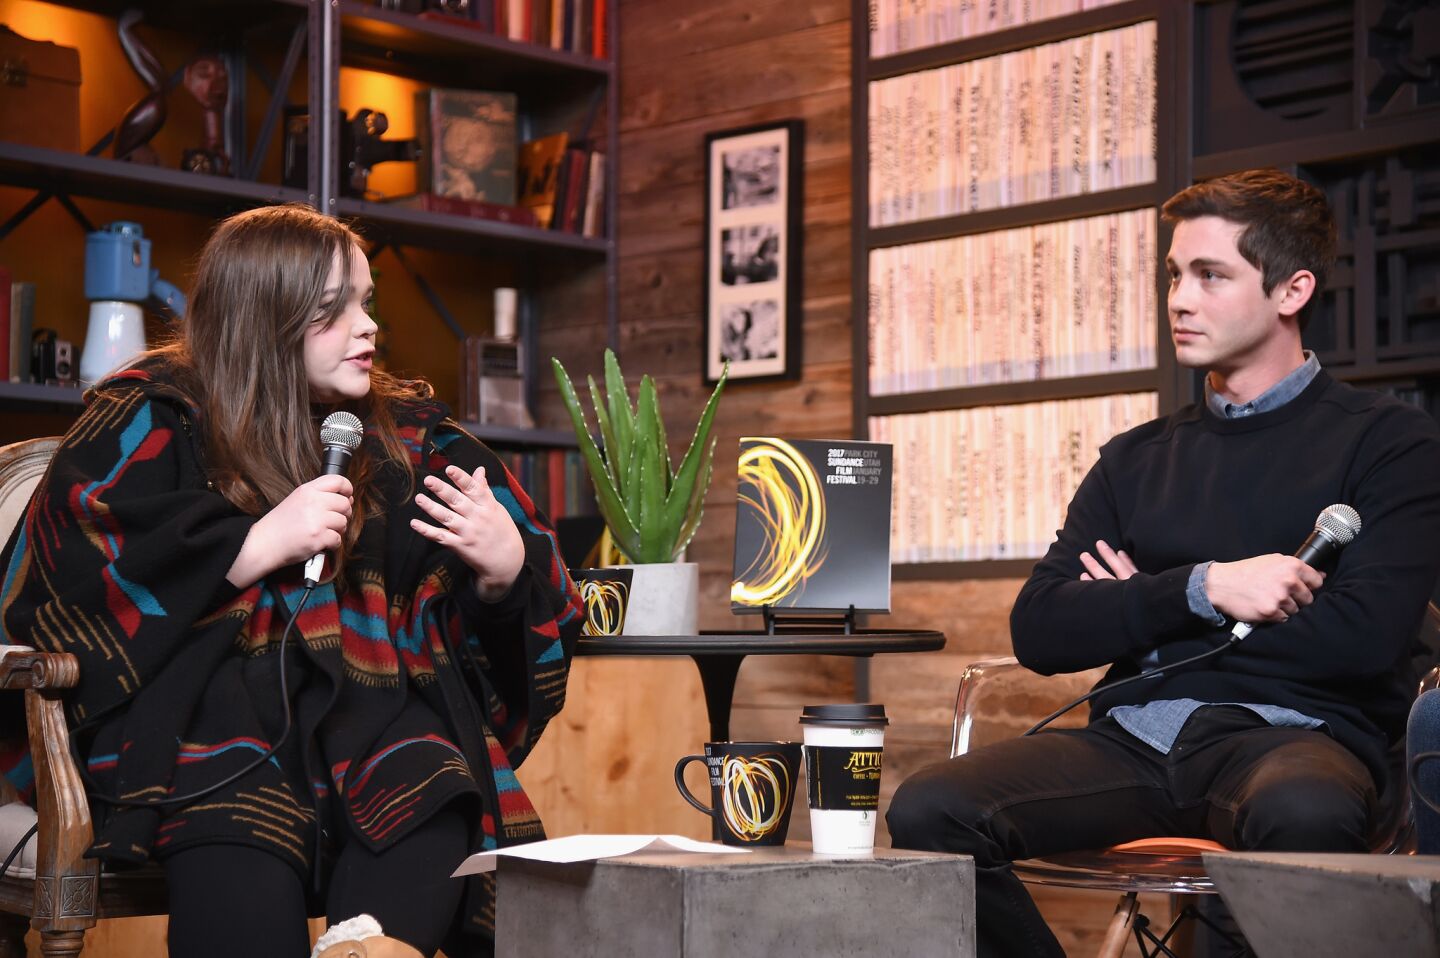 Times reporter Amy Kaufman and Logan Lerman speak at the Cinema Cafe at Filmmaker Lodge.